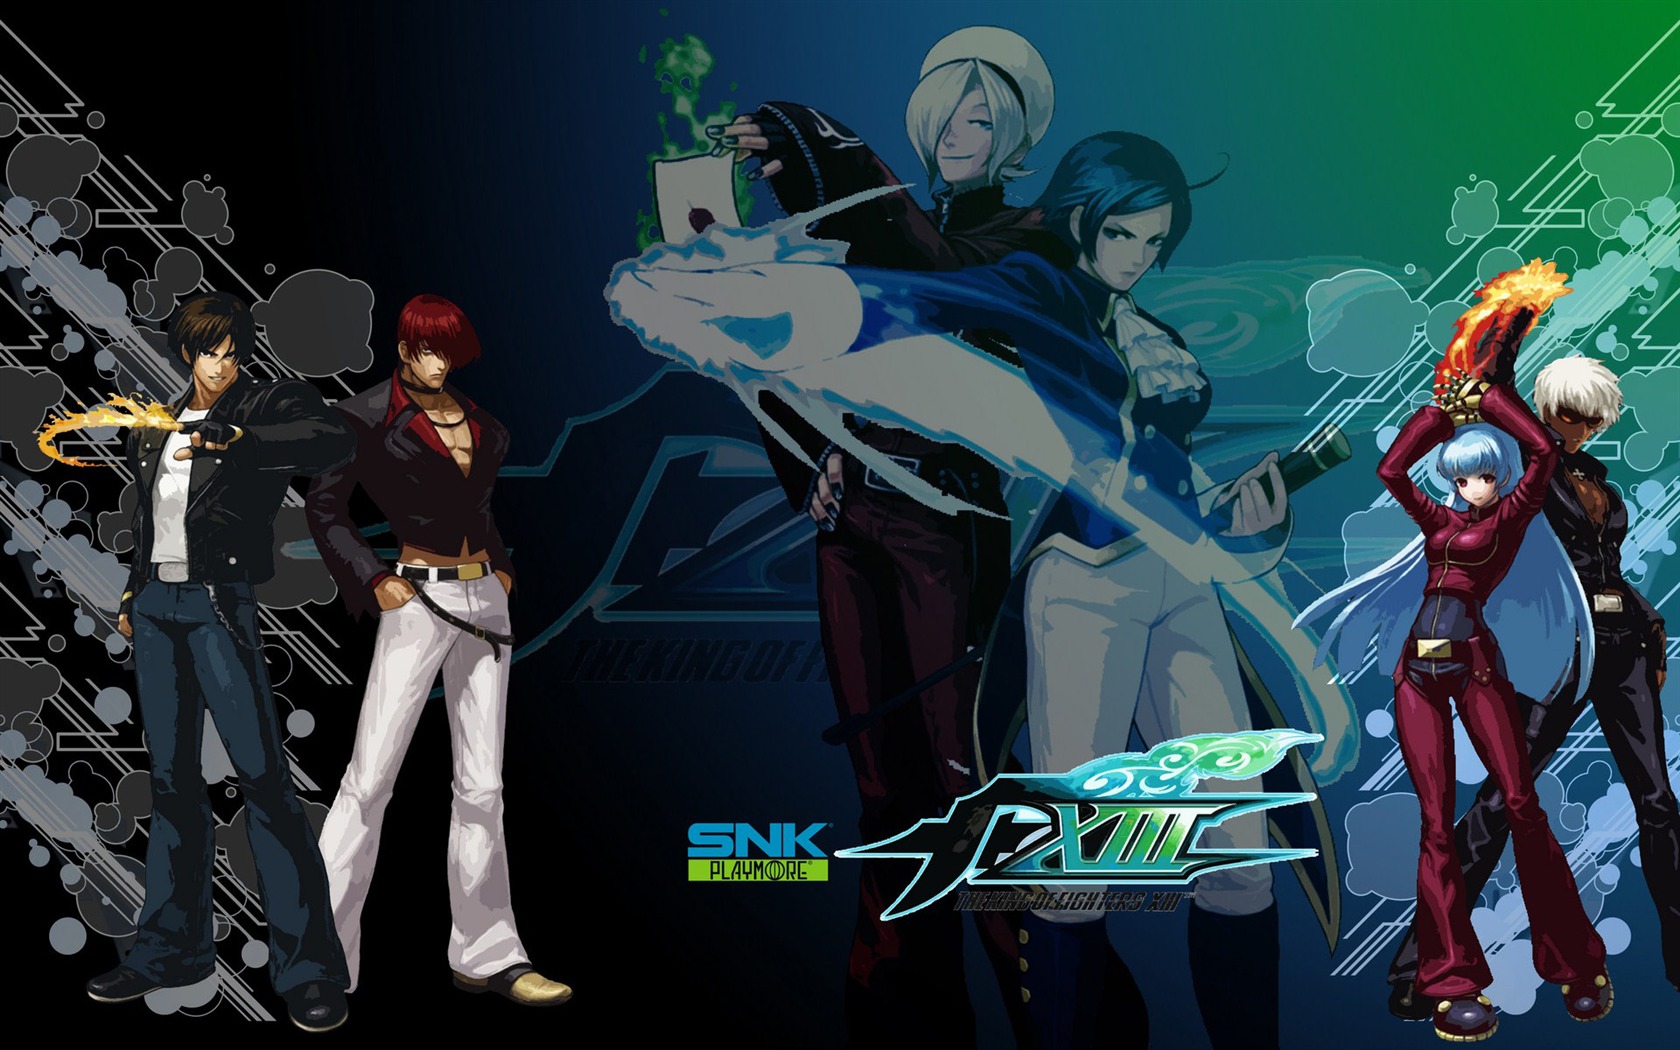 Le roi de wallpapers Fighters XIII #4 - 1680x1050